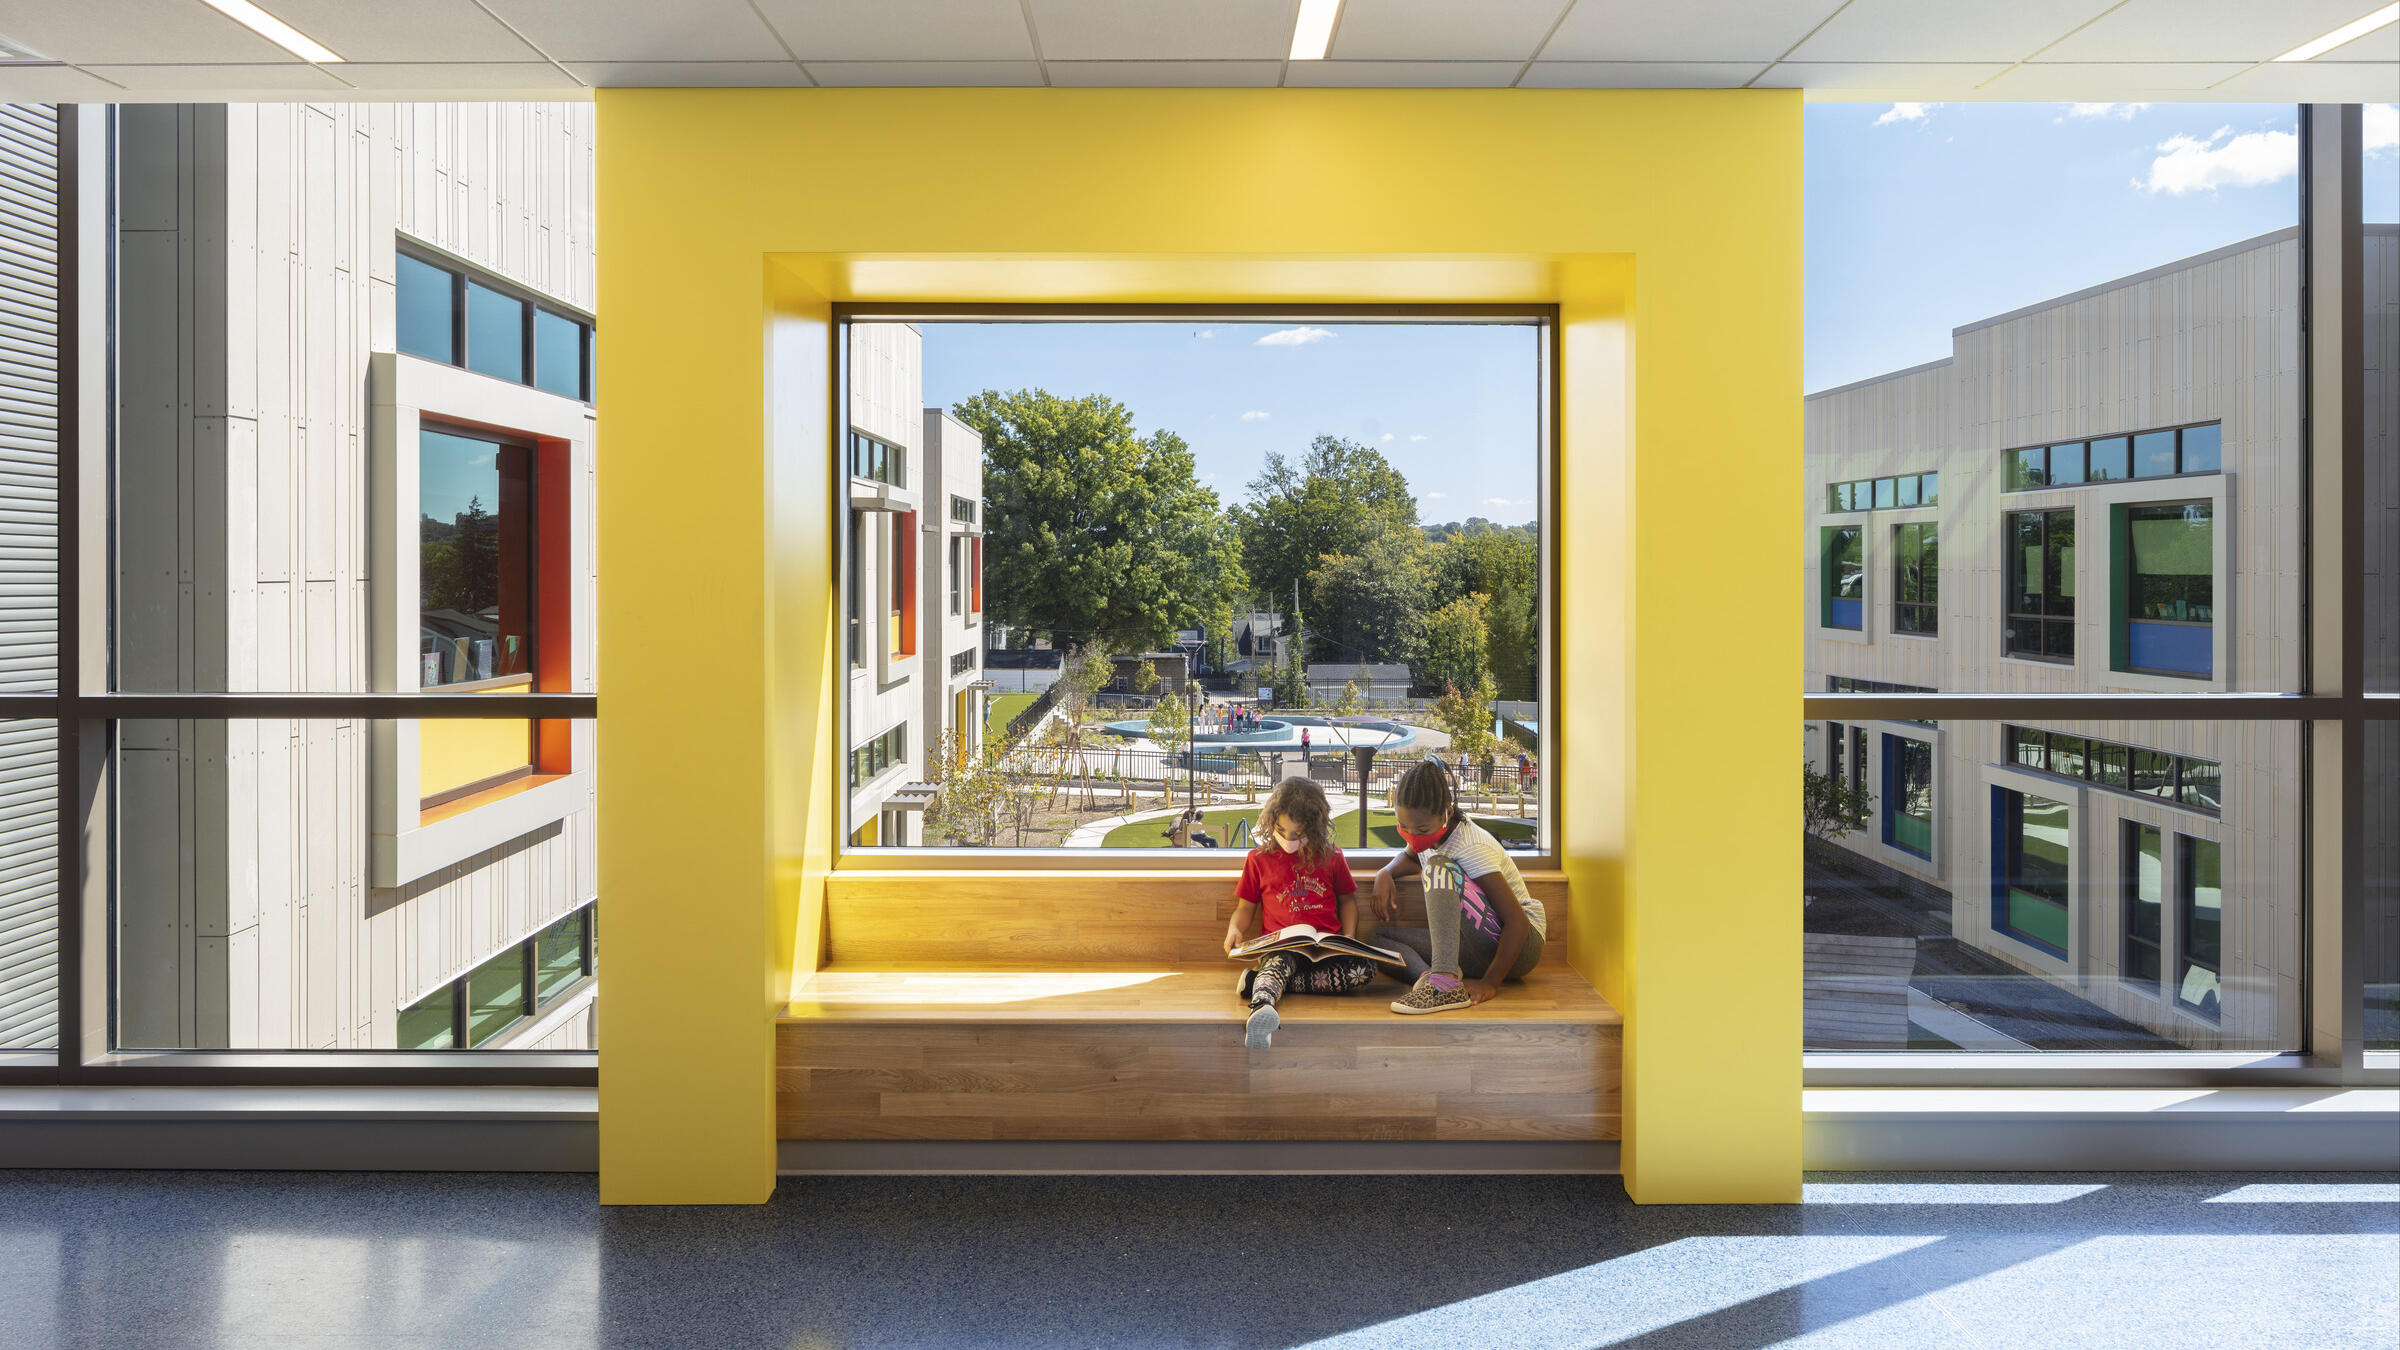 Children read a book on a bench in a brightly lit, sunny hallway of John Lewis Elementary School.